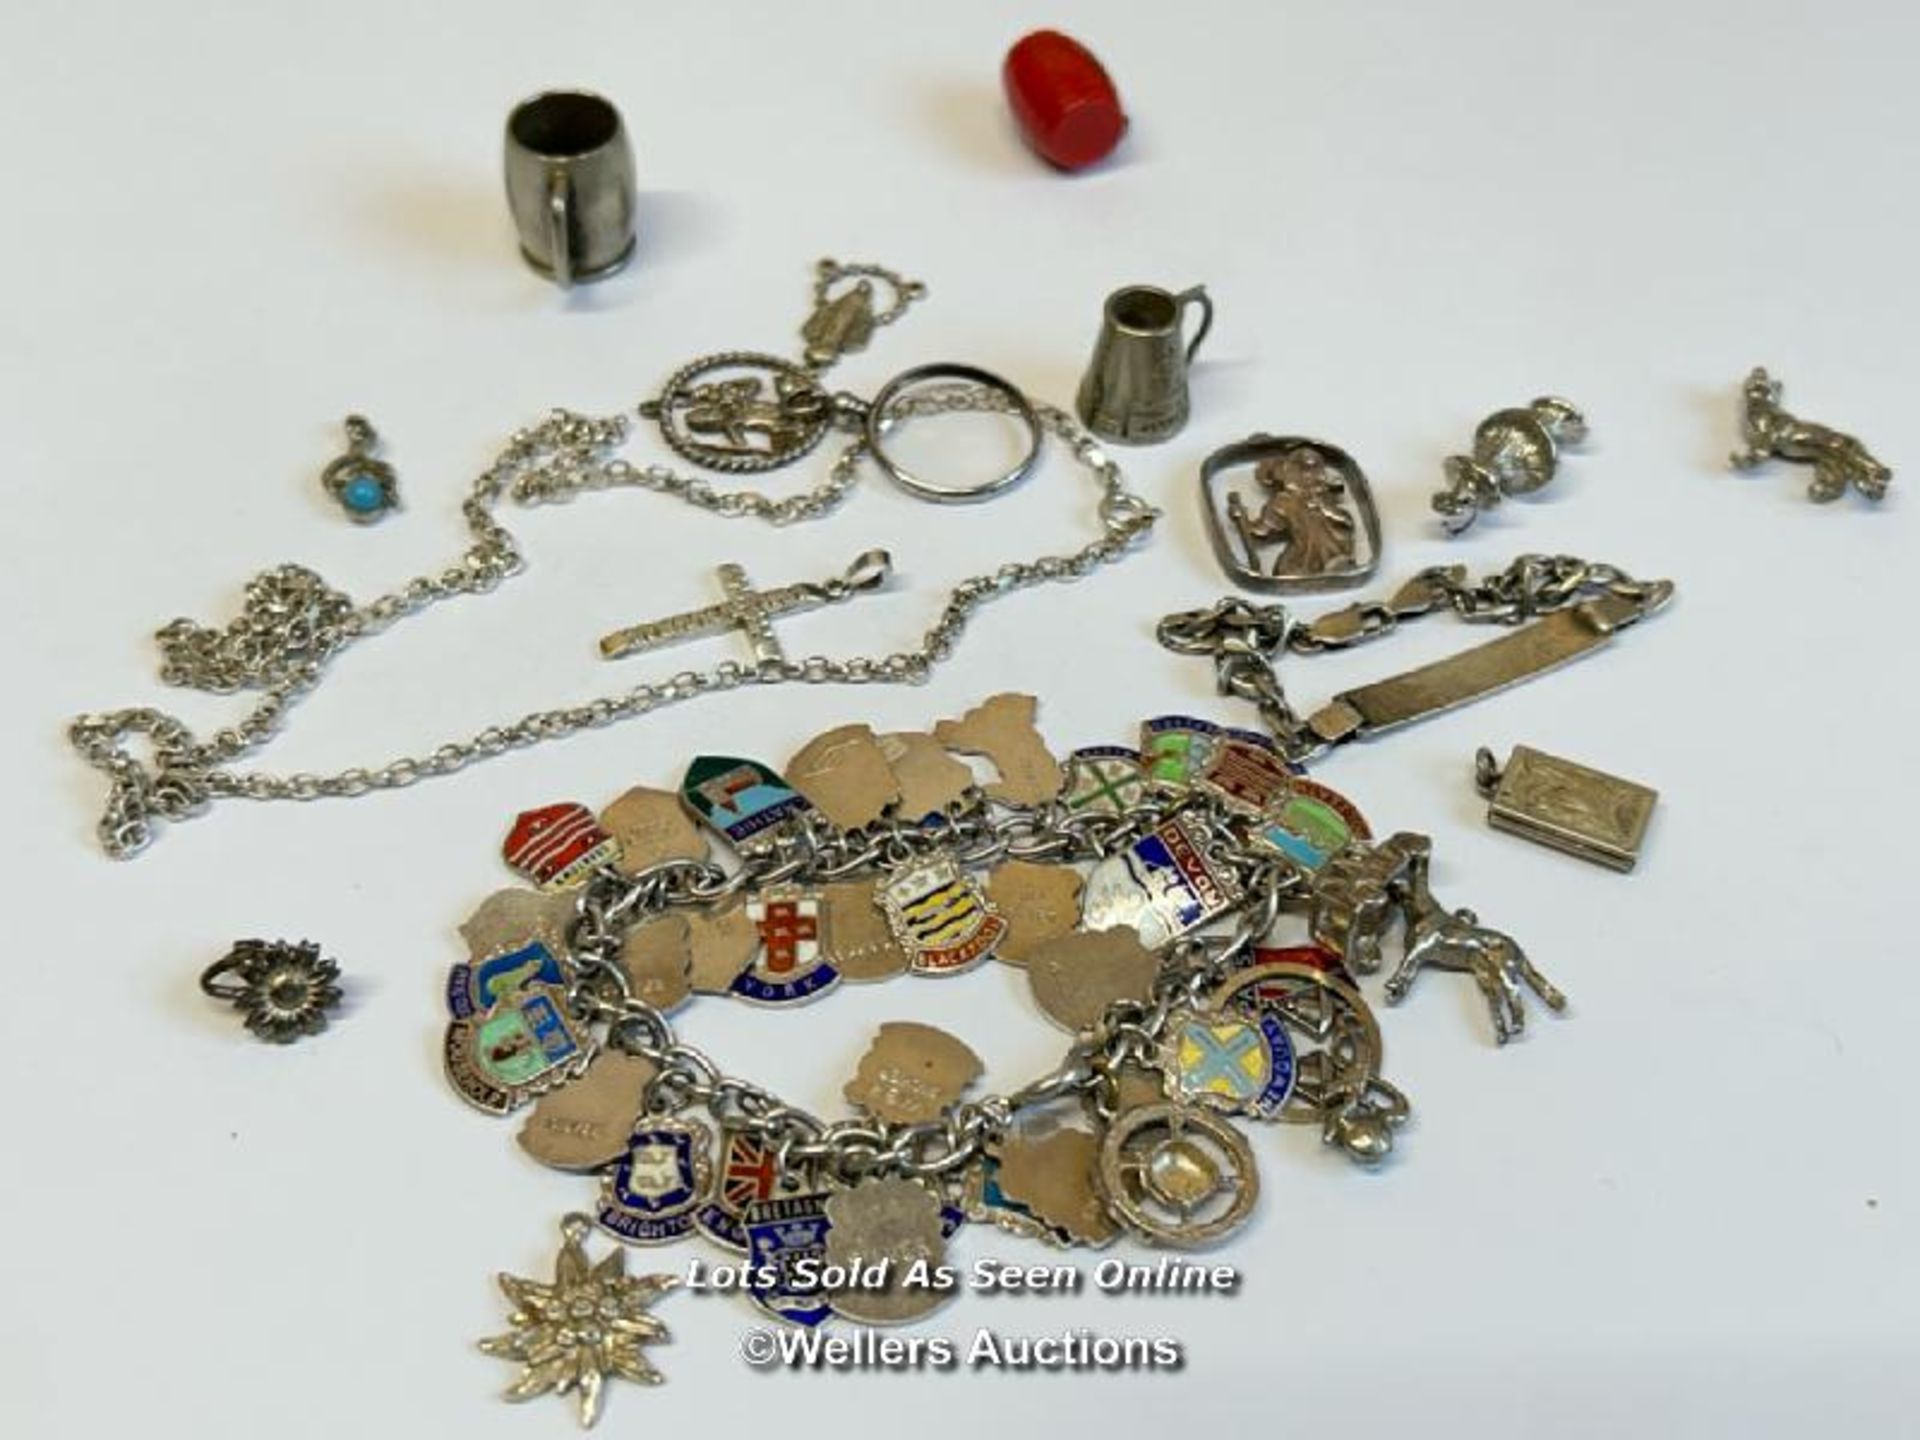 Silver charm bracelet with thirty-eight mostly souvenir charms, along with a silver chain and